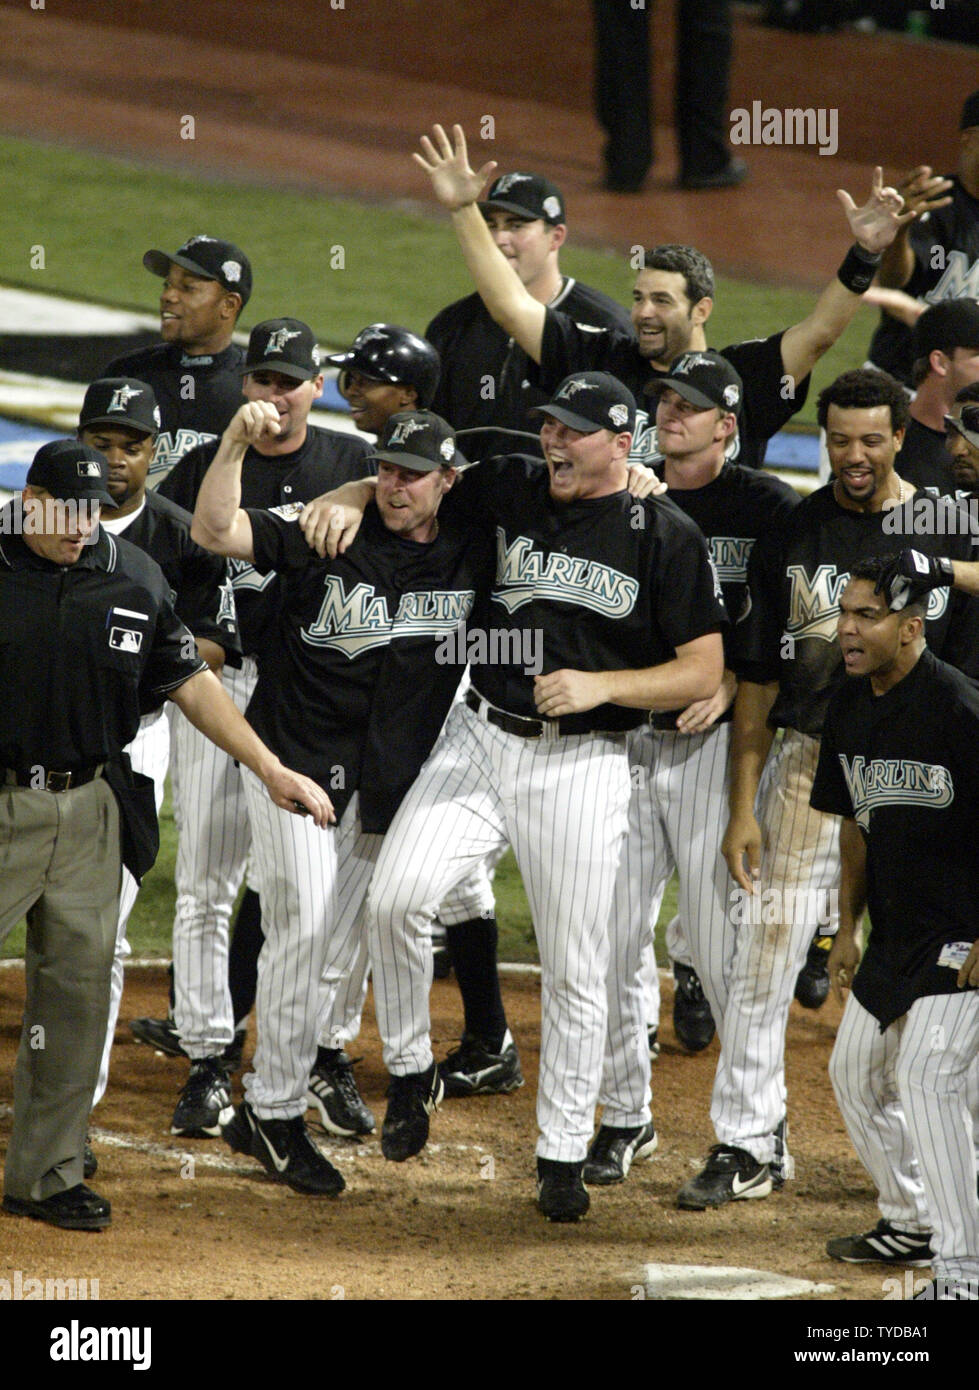 The Florida Marlins celebrate victory,waiting for Alex Gonzalez to get to  home, after hitting a walk off home run in the 12th inning against the New  York Yankees in game 4 of